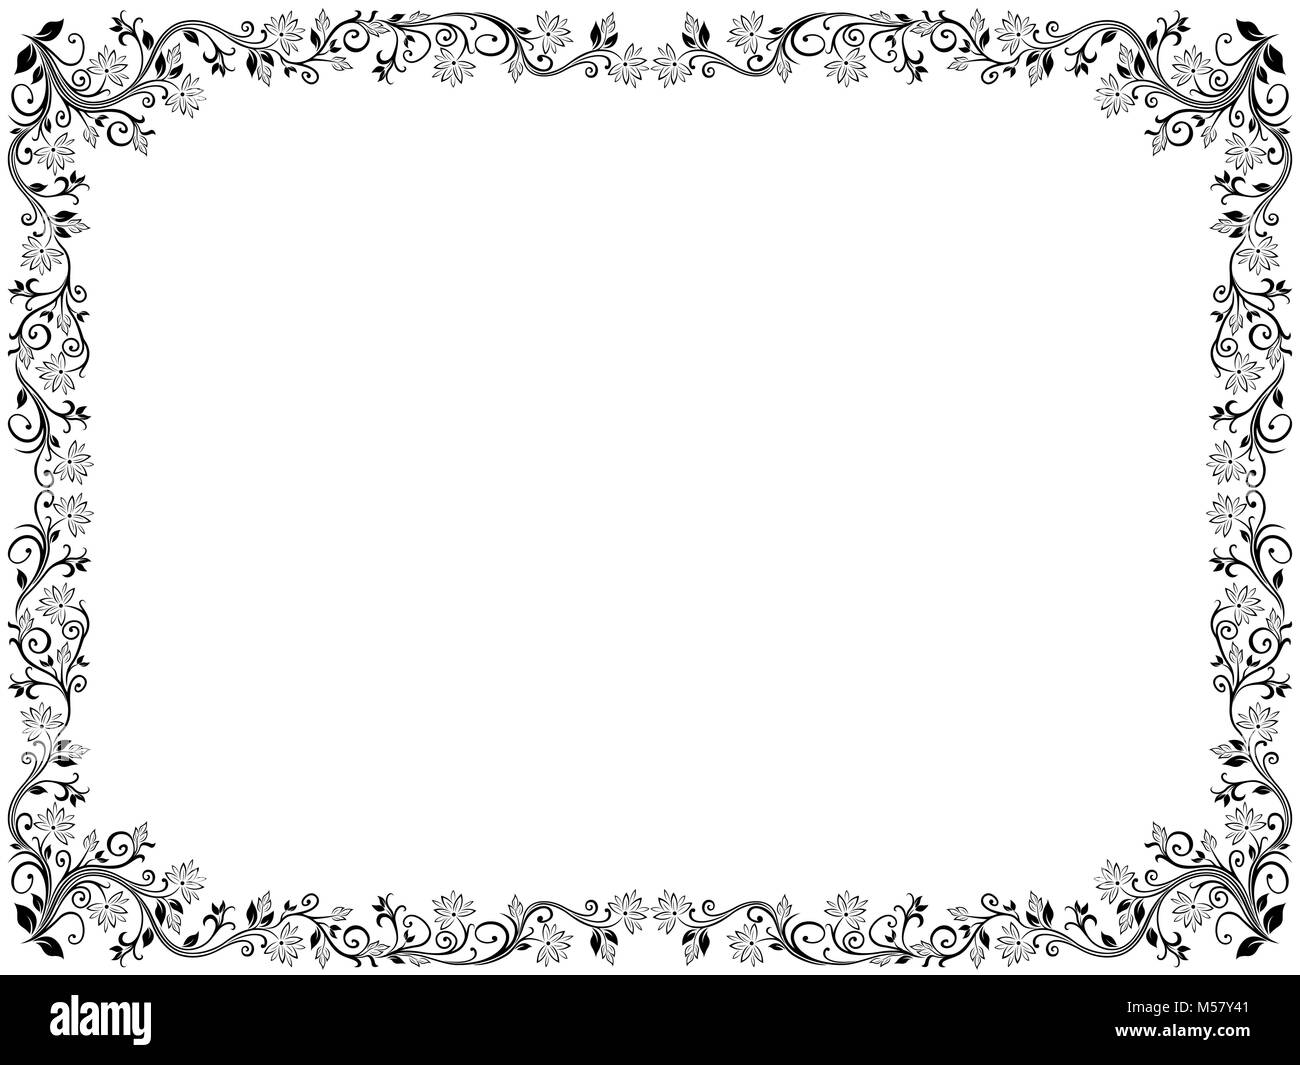 Ornamental floral frame with leaves and flowers, vector illustration Stock Vector